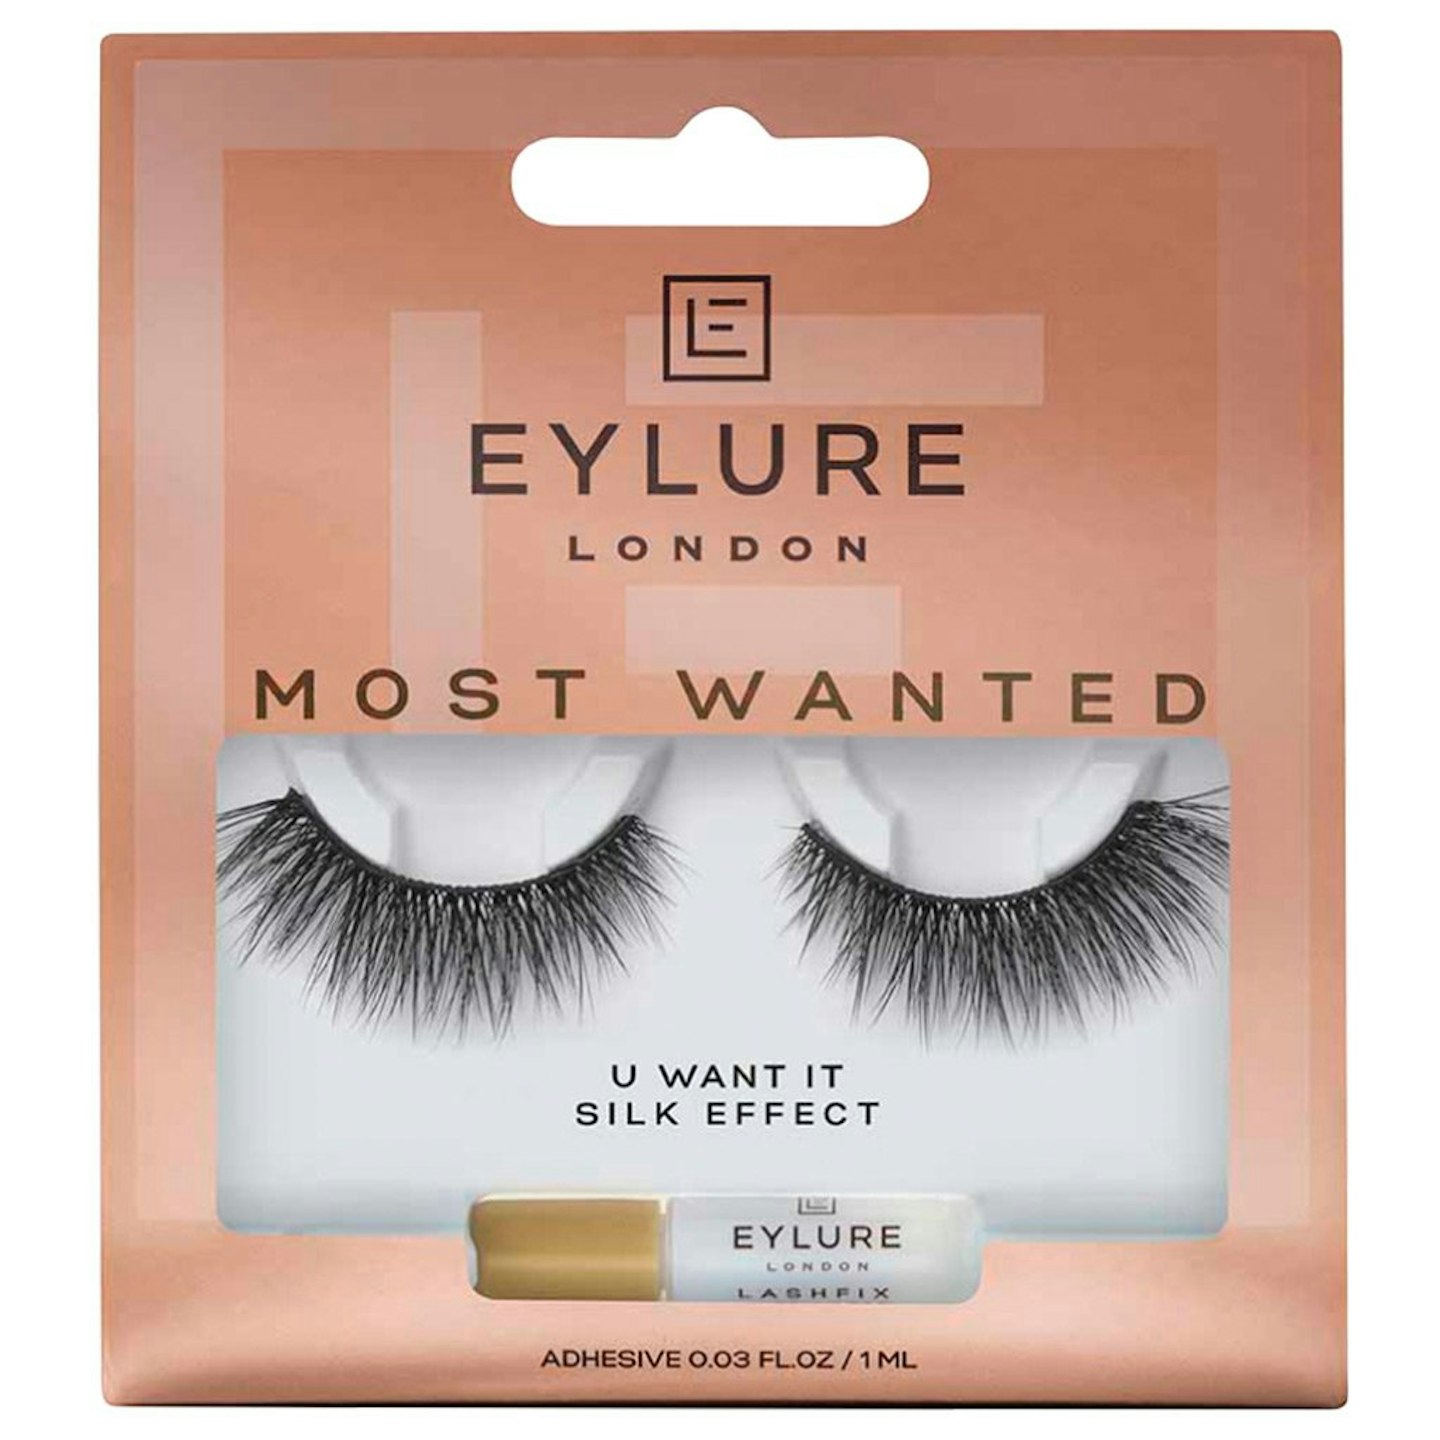 Eylure Most Wanted Lashes, £12.50